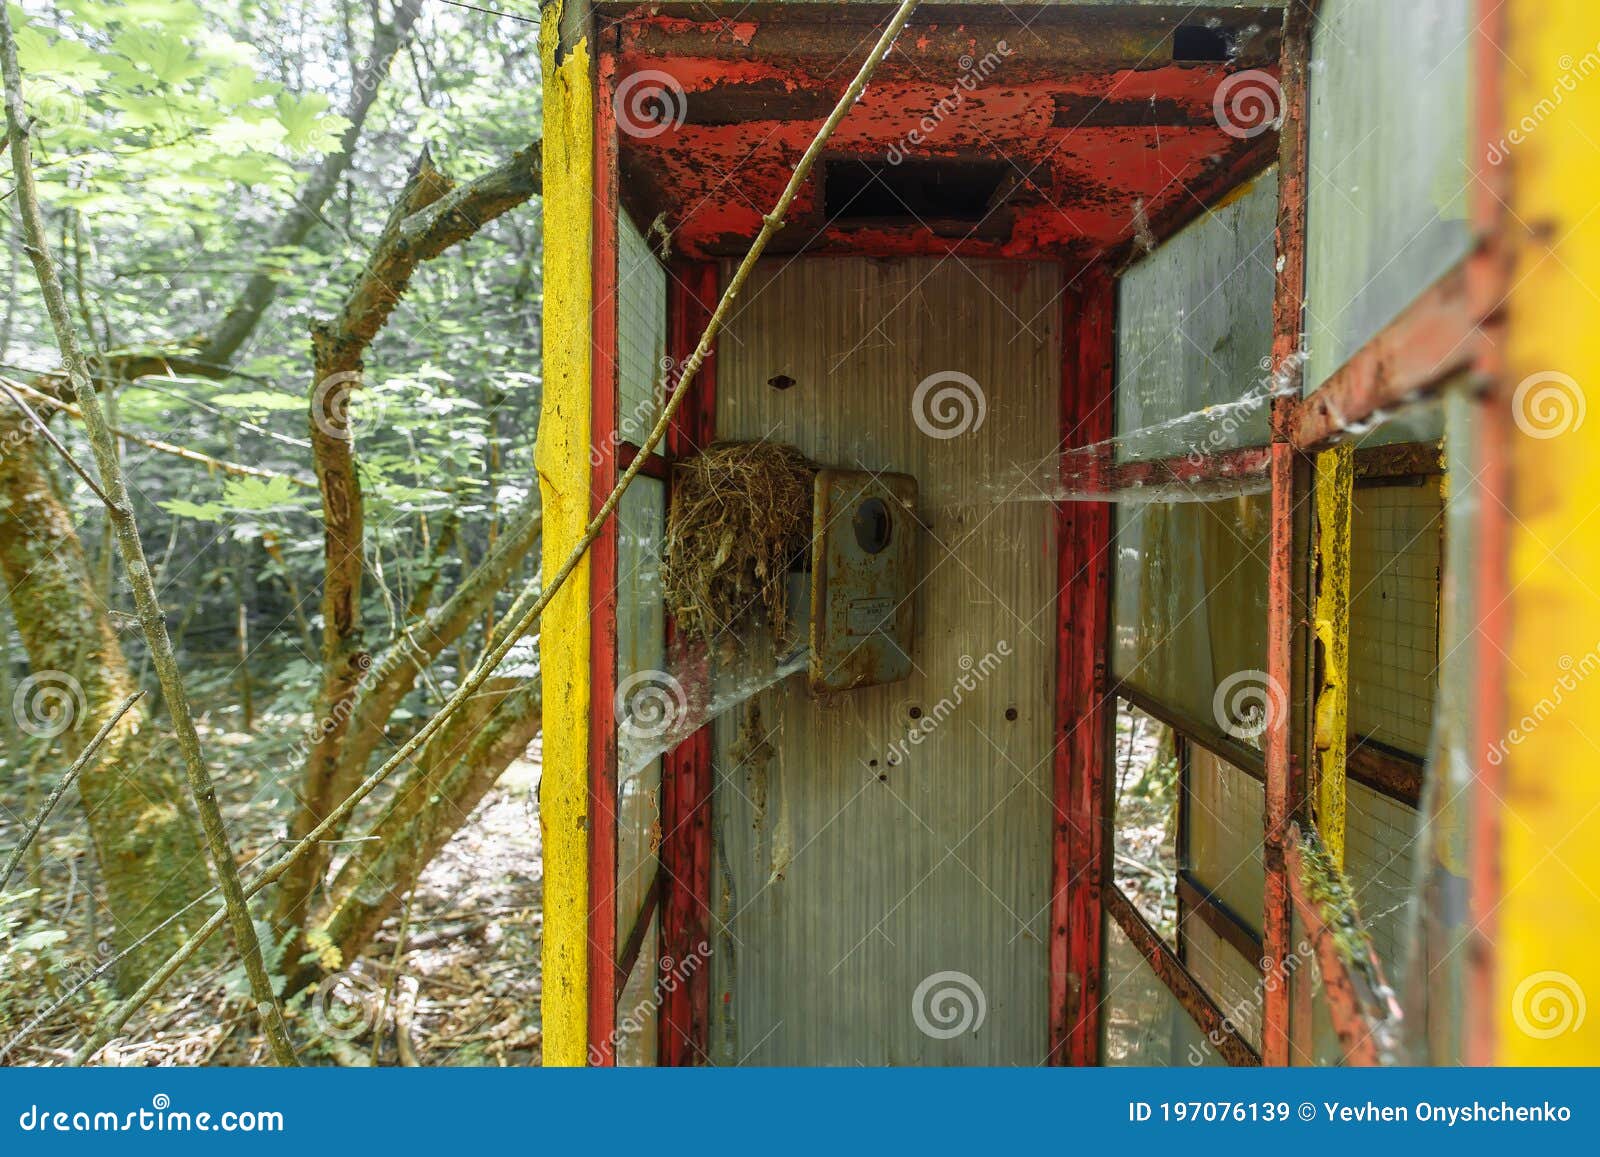 abandoned phonebox in ghost town pripyat chornobyl zone